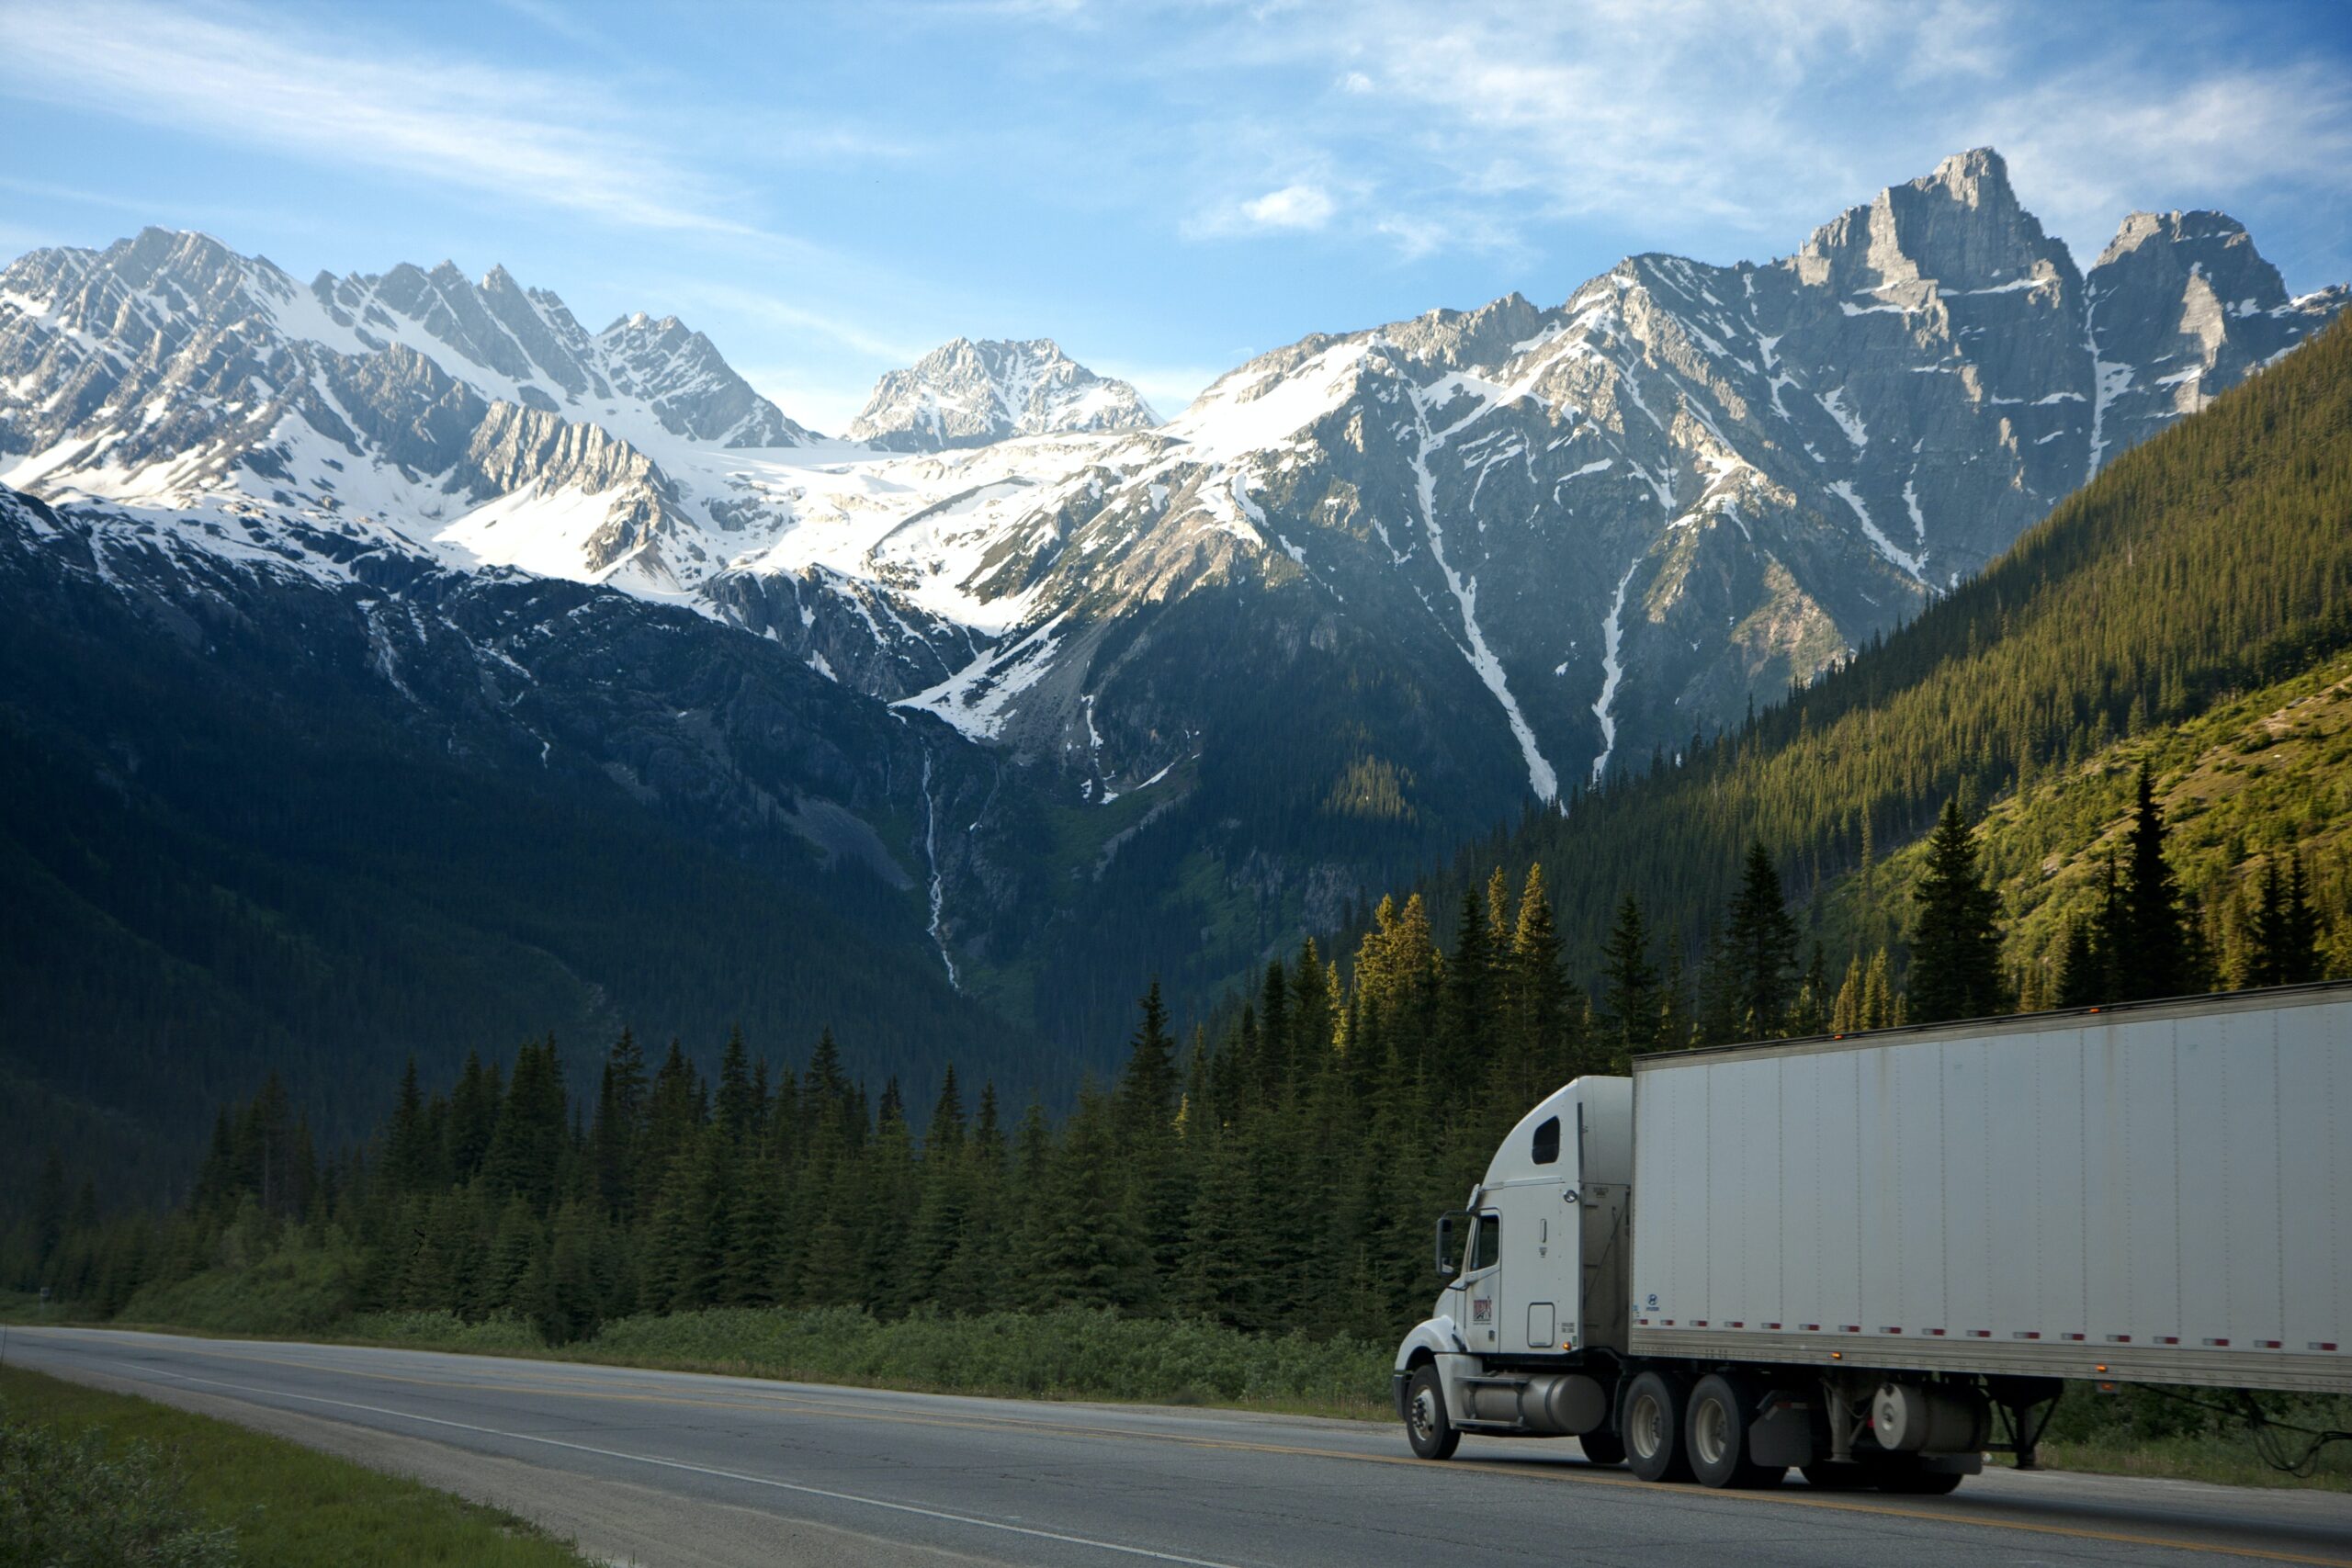 A truck on a highway against a backdrop of mountains